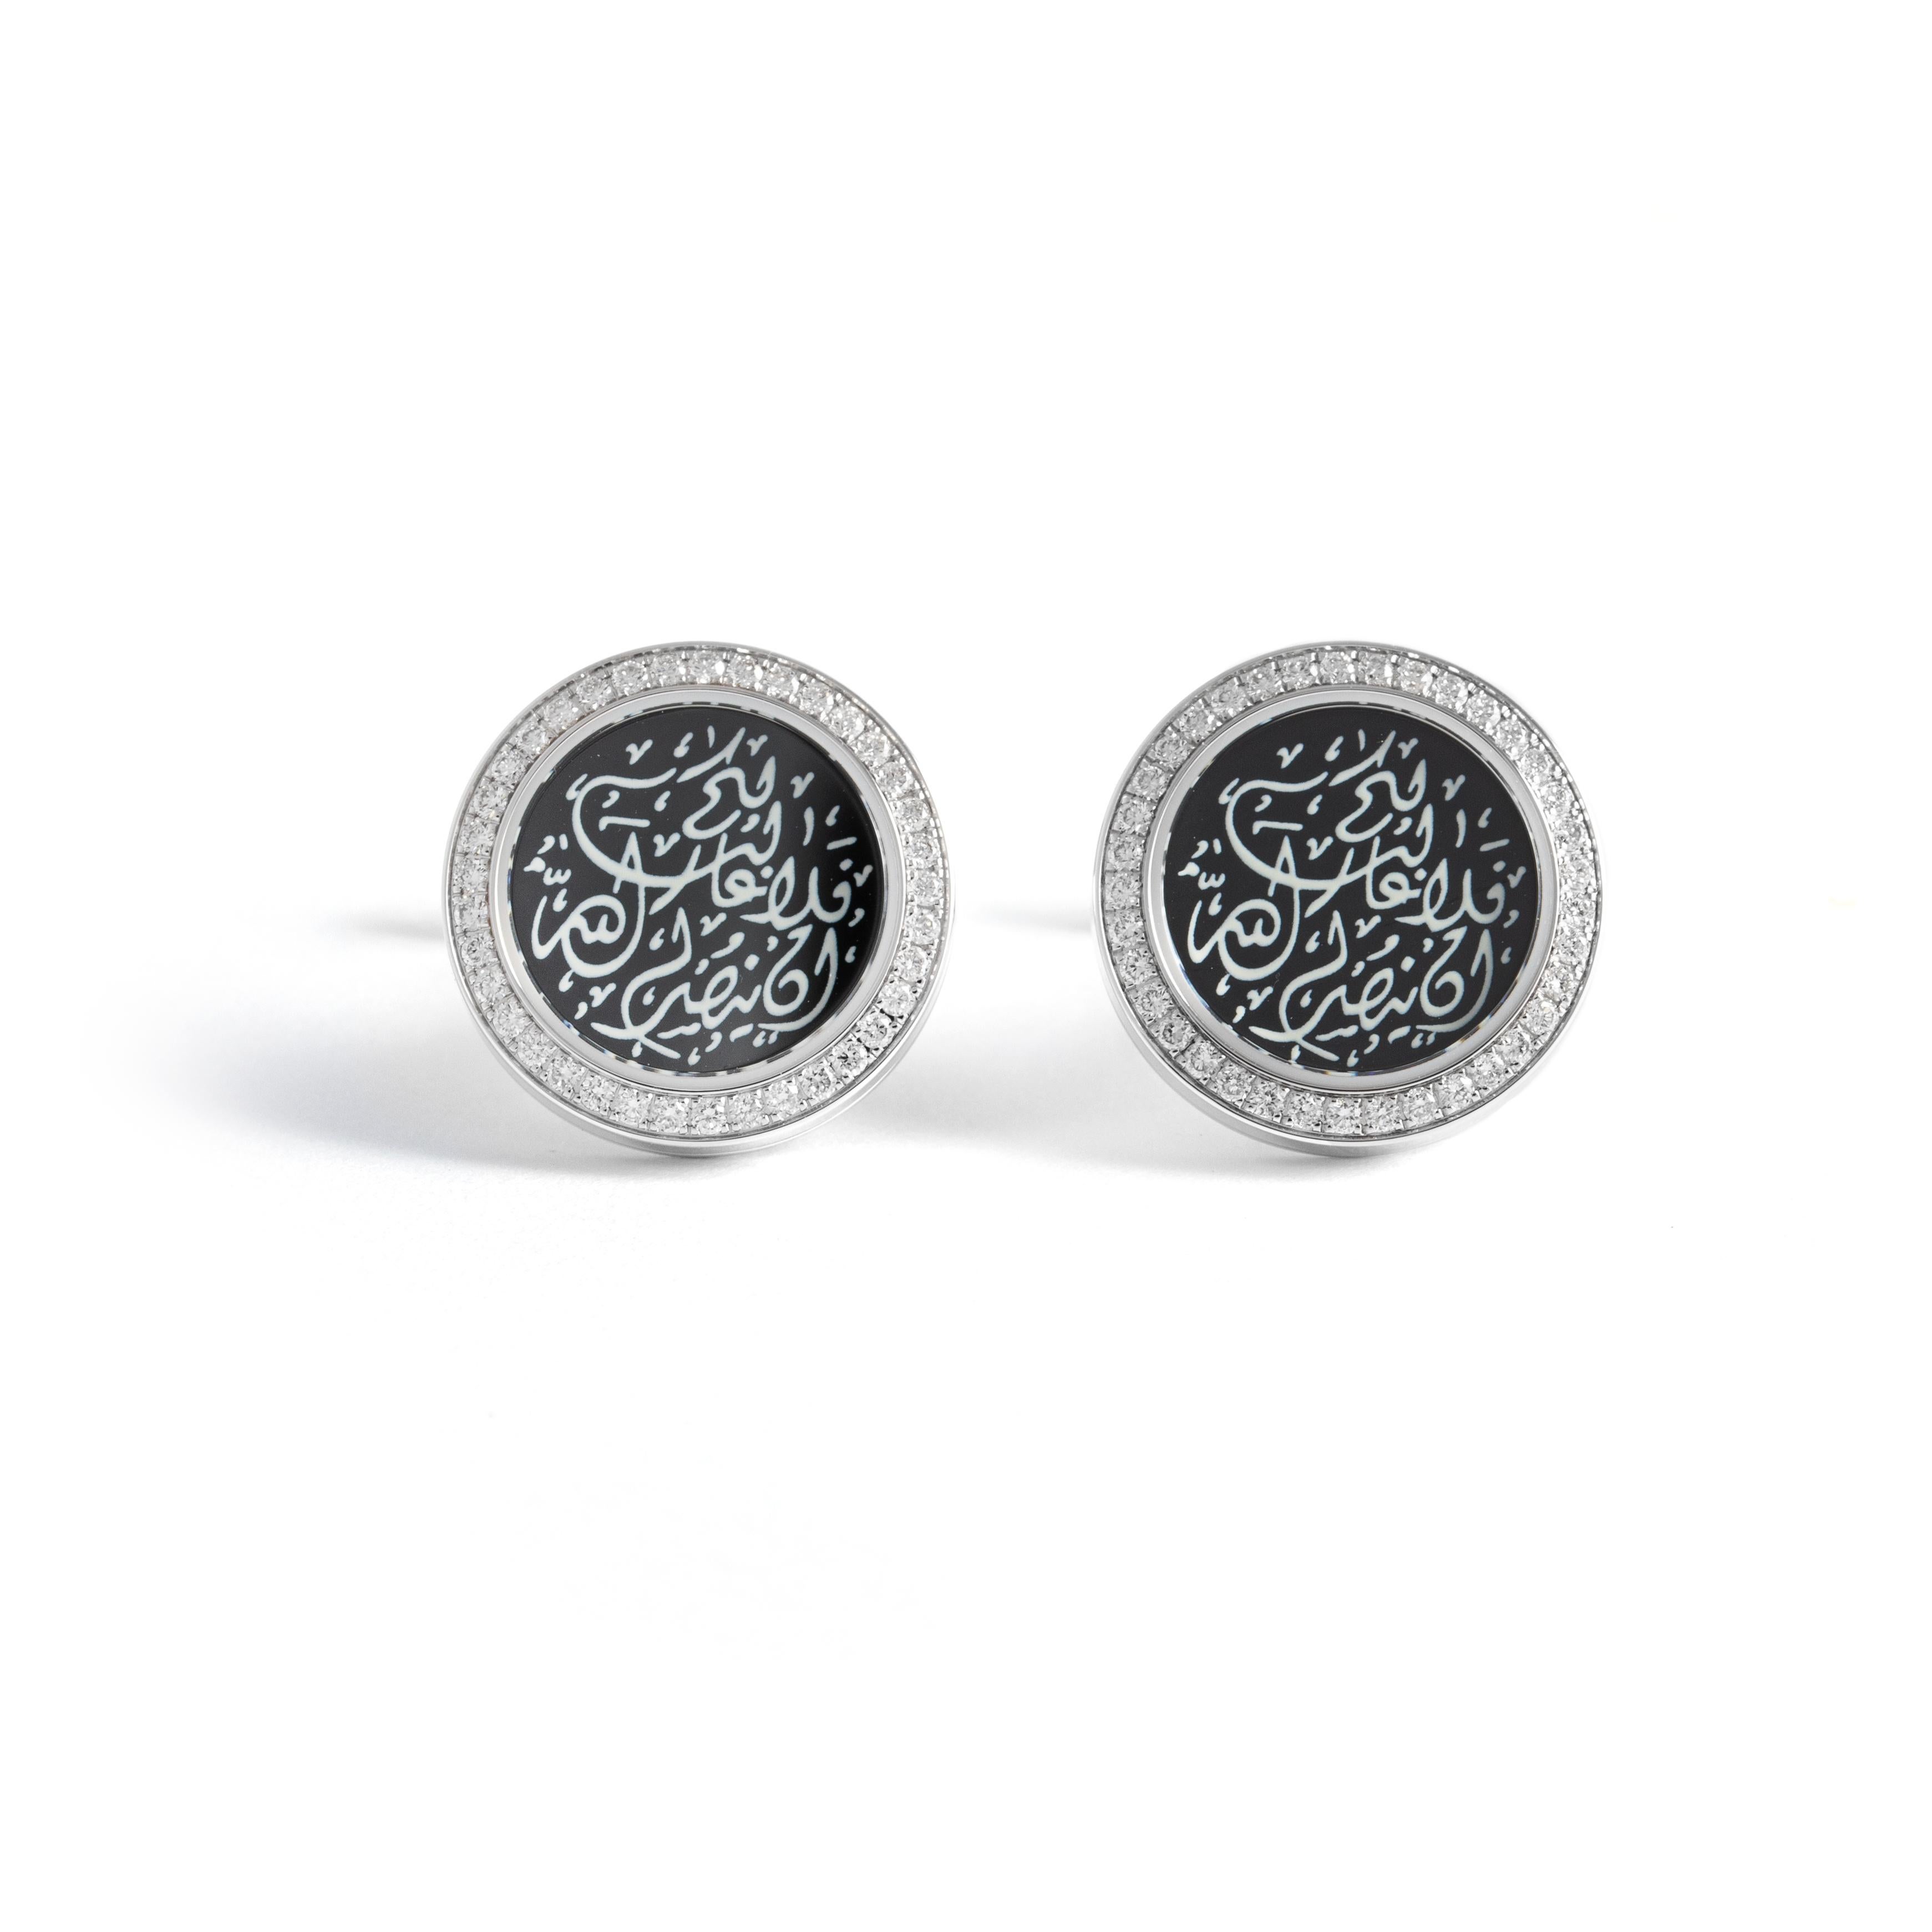 Cufflinks set with diamonds 0.56 carat.
Total weight: 17.94 grams.
Diameter: 1.80 centimeters ( 0.71 inches).